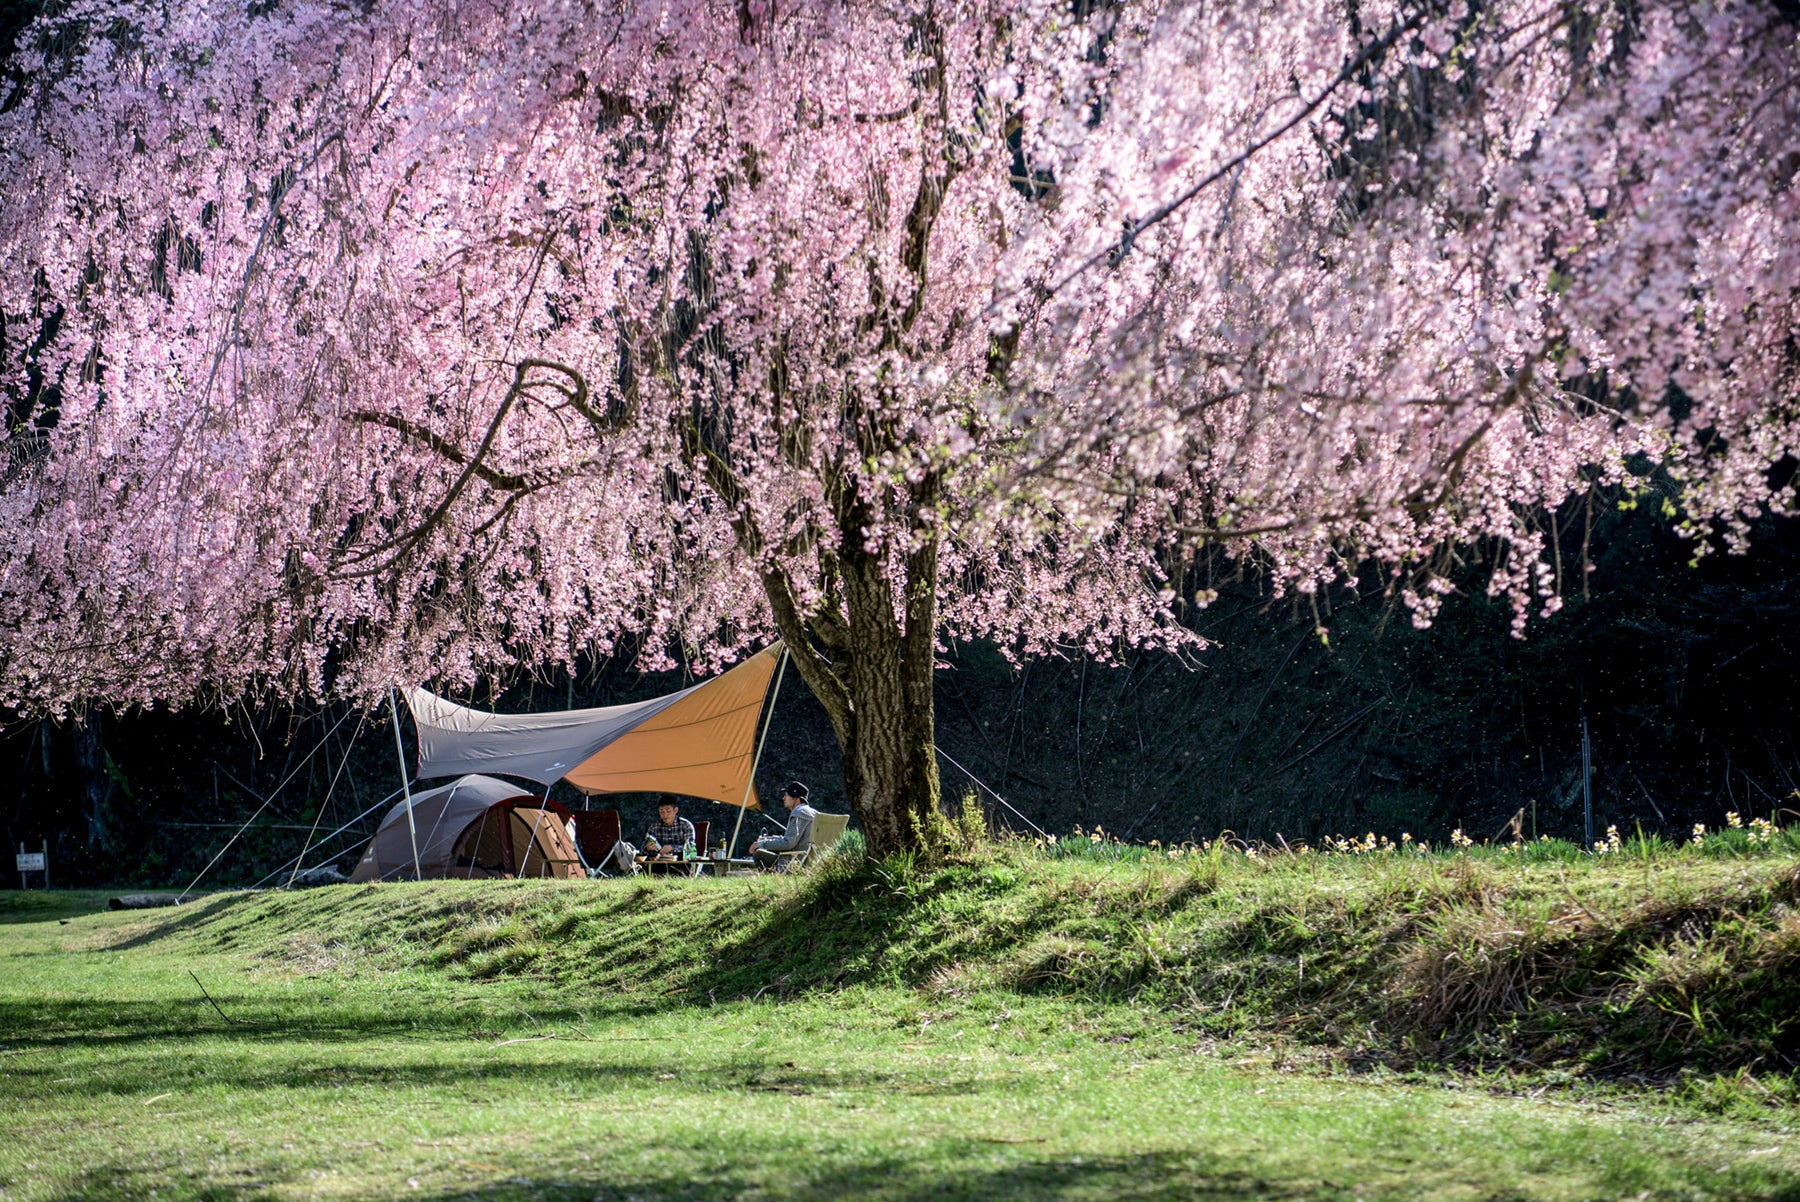 5 Reasons why Camping in the Spring is Awesome